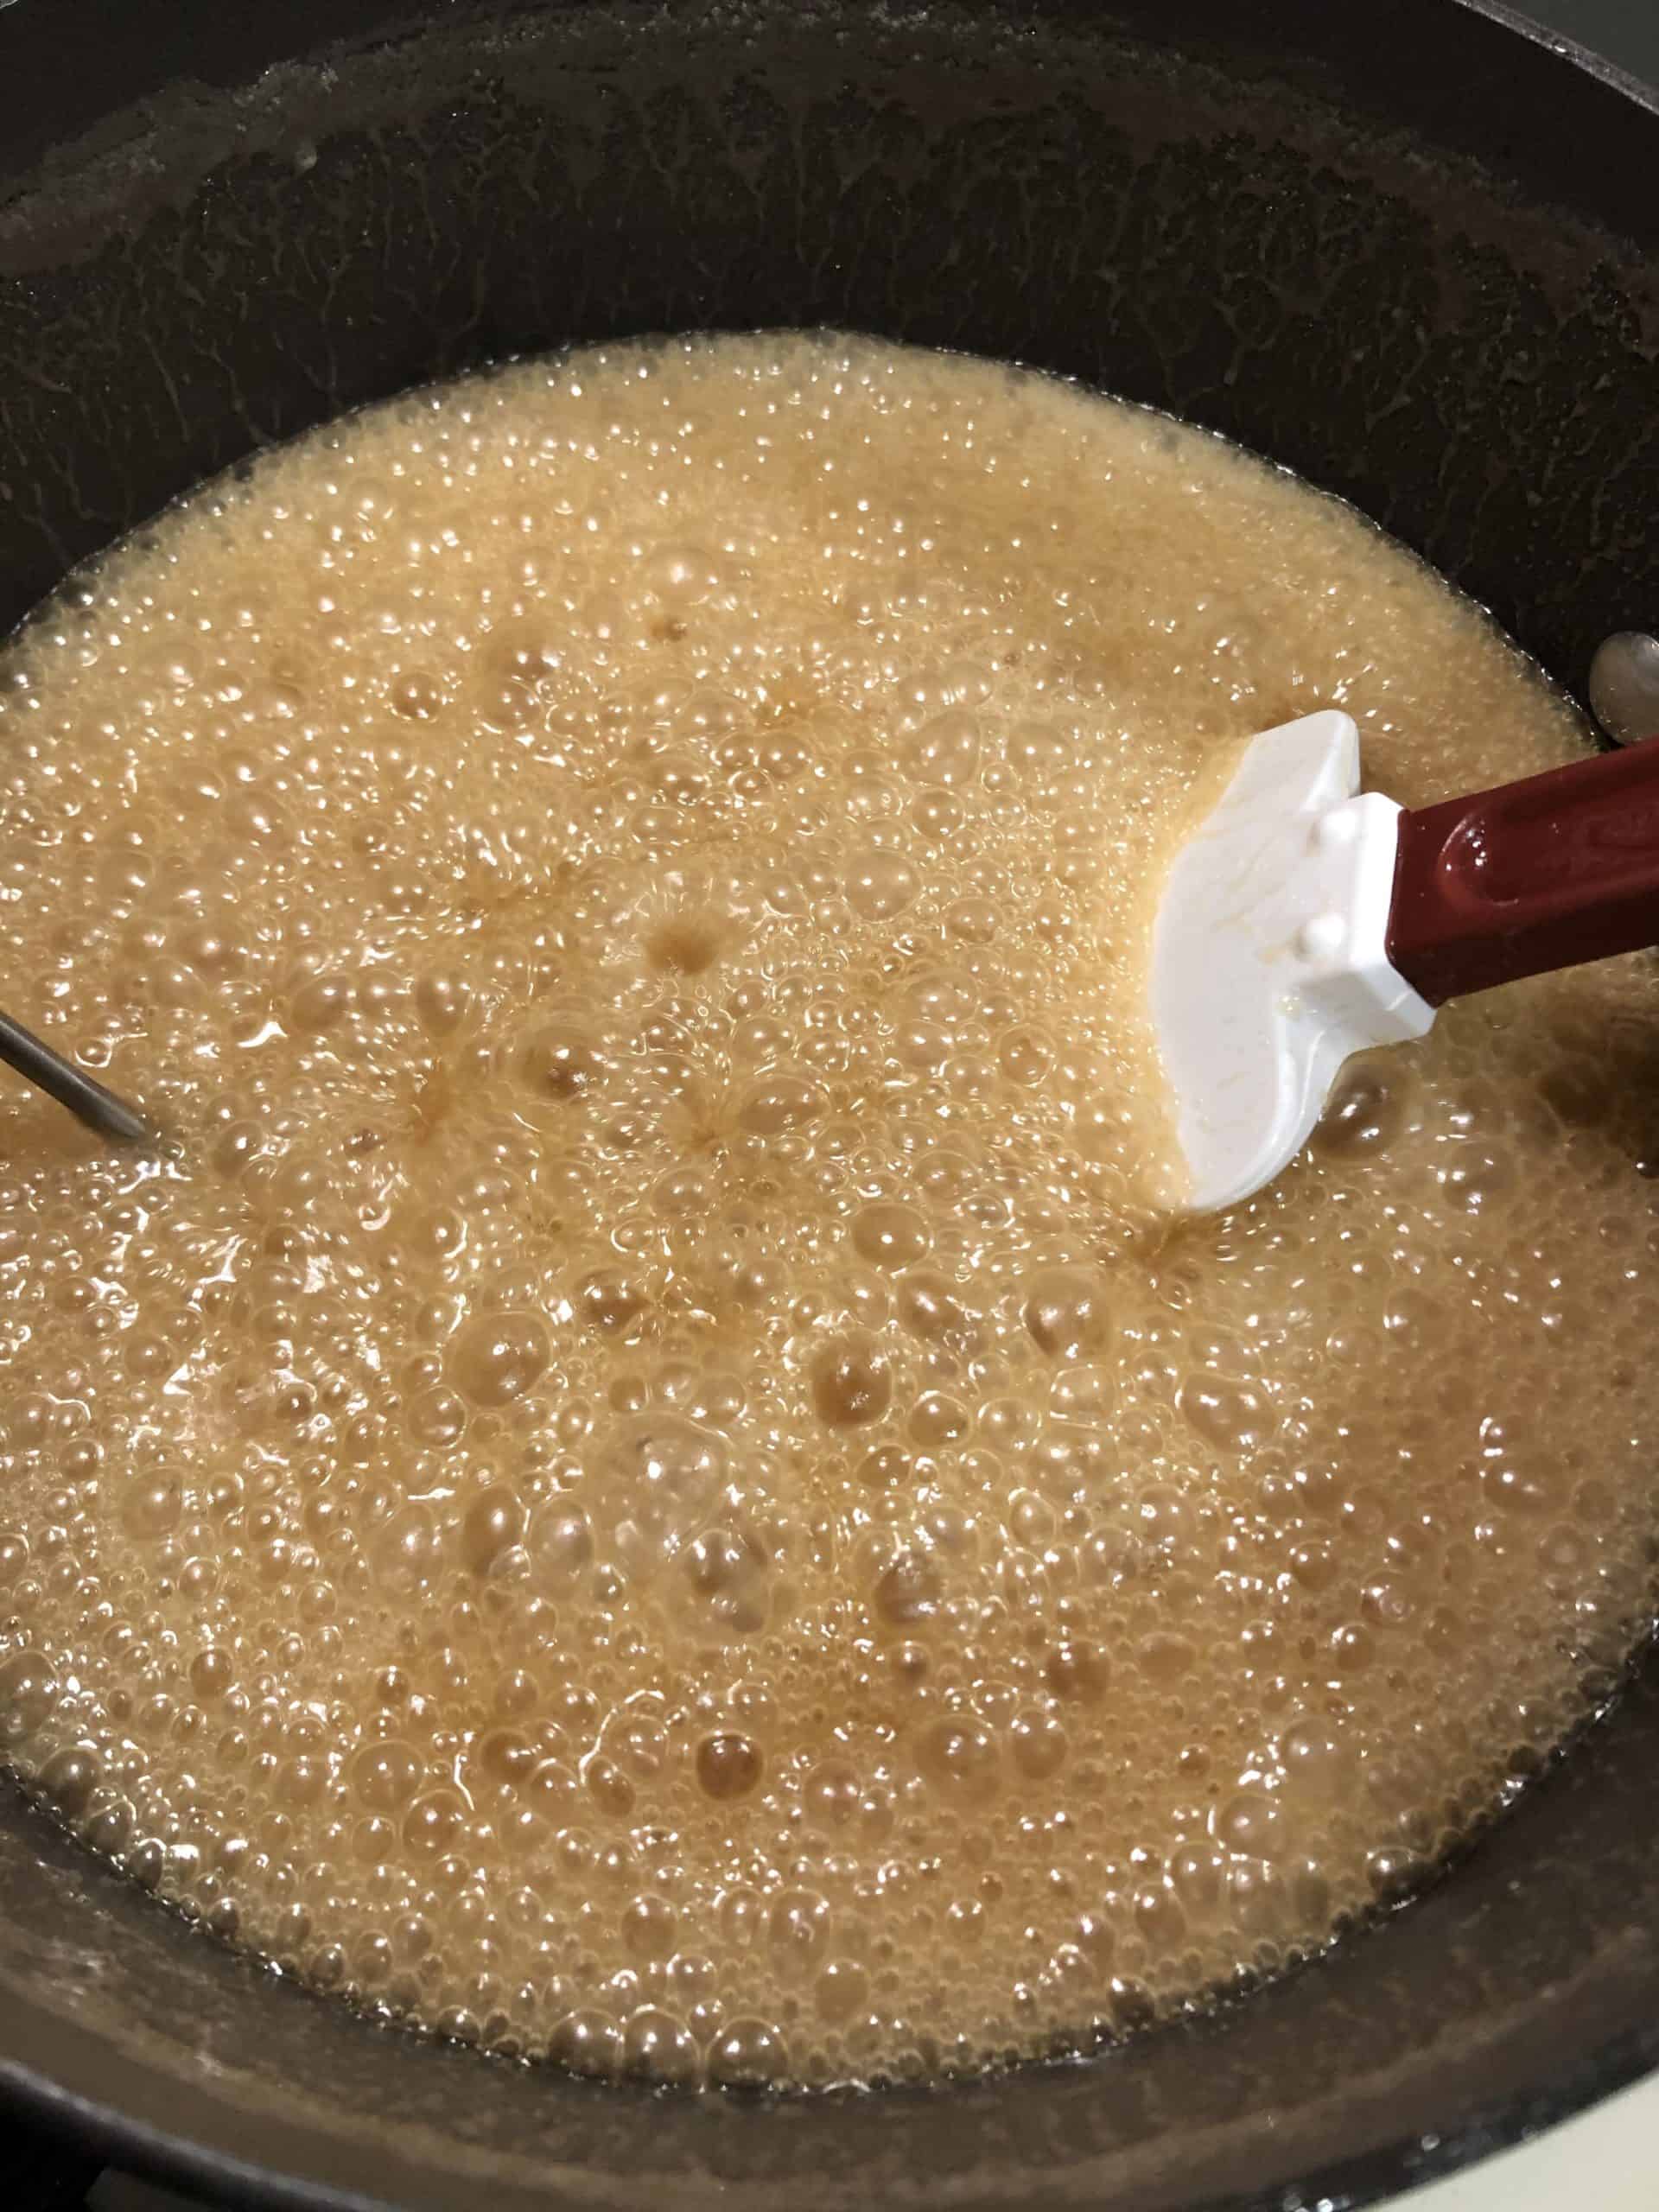 First stage of making homemade caramel in a 6 quart saucepan.